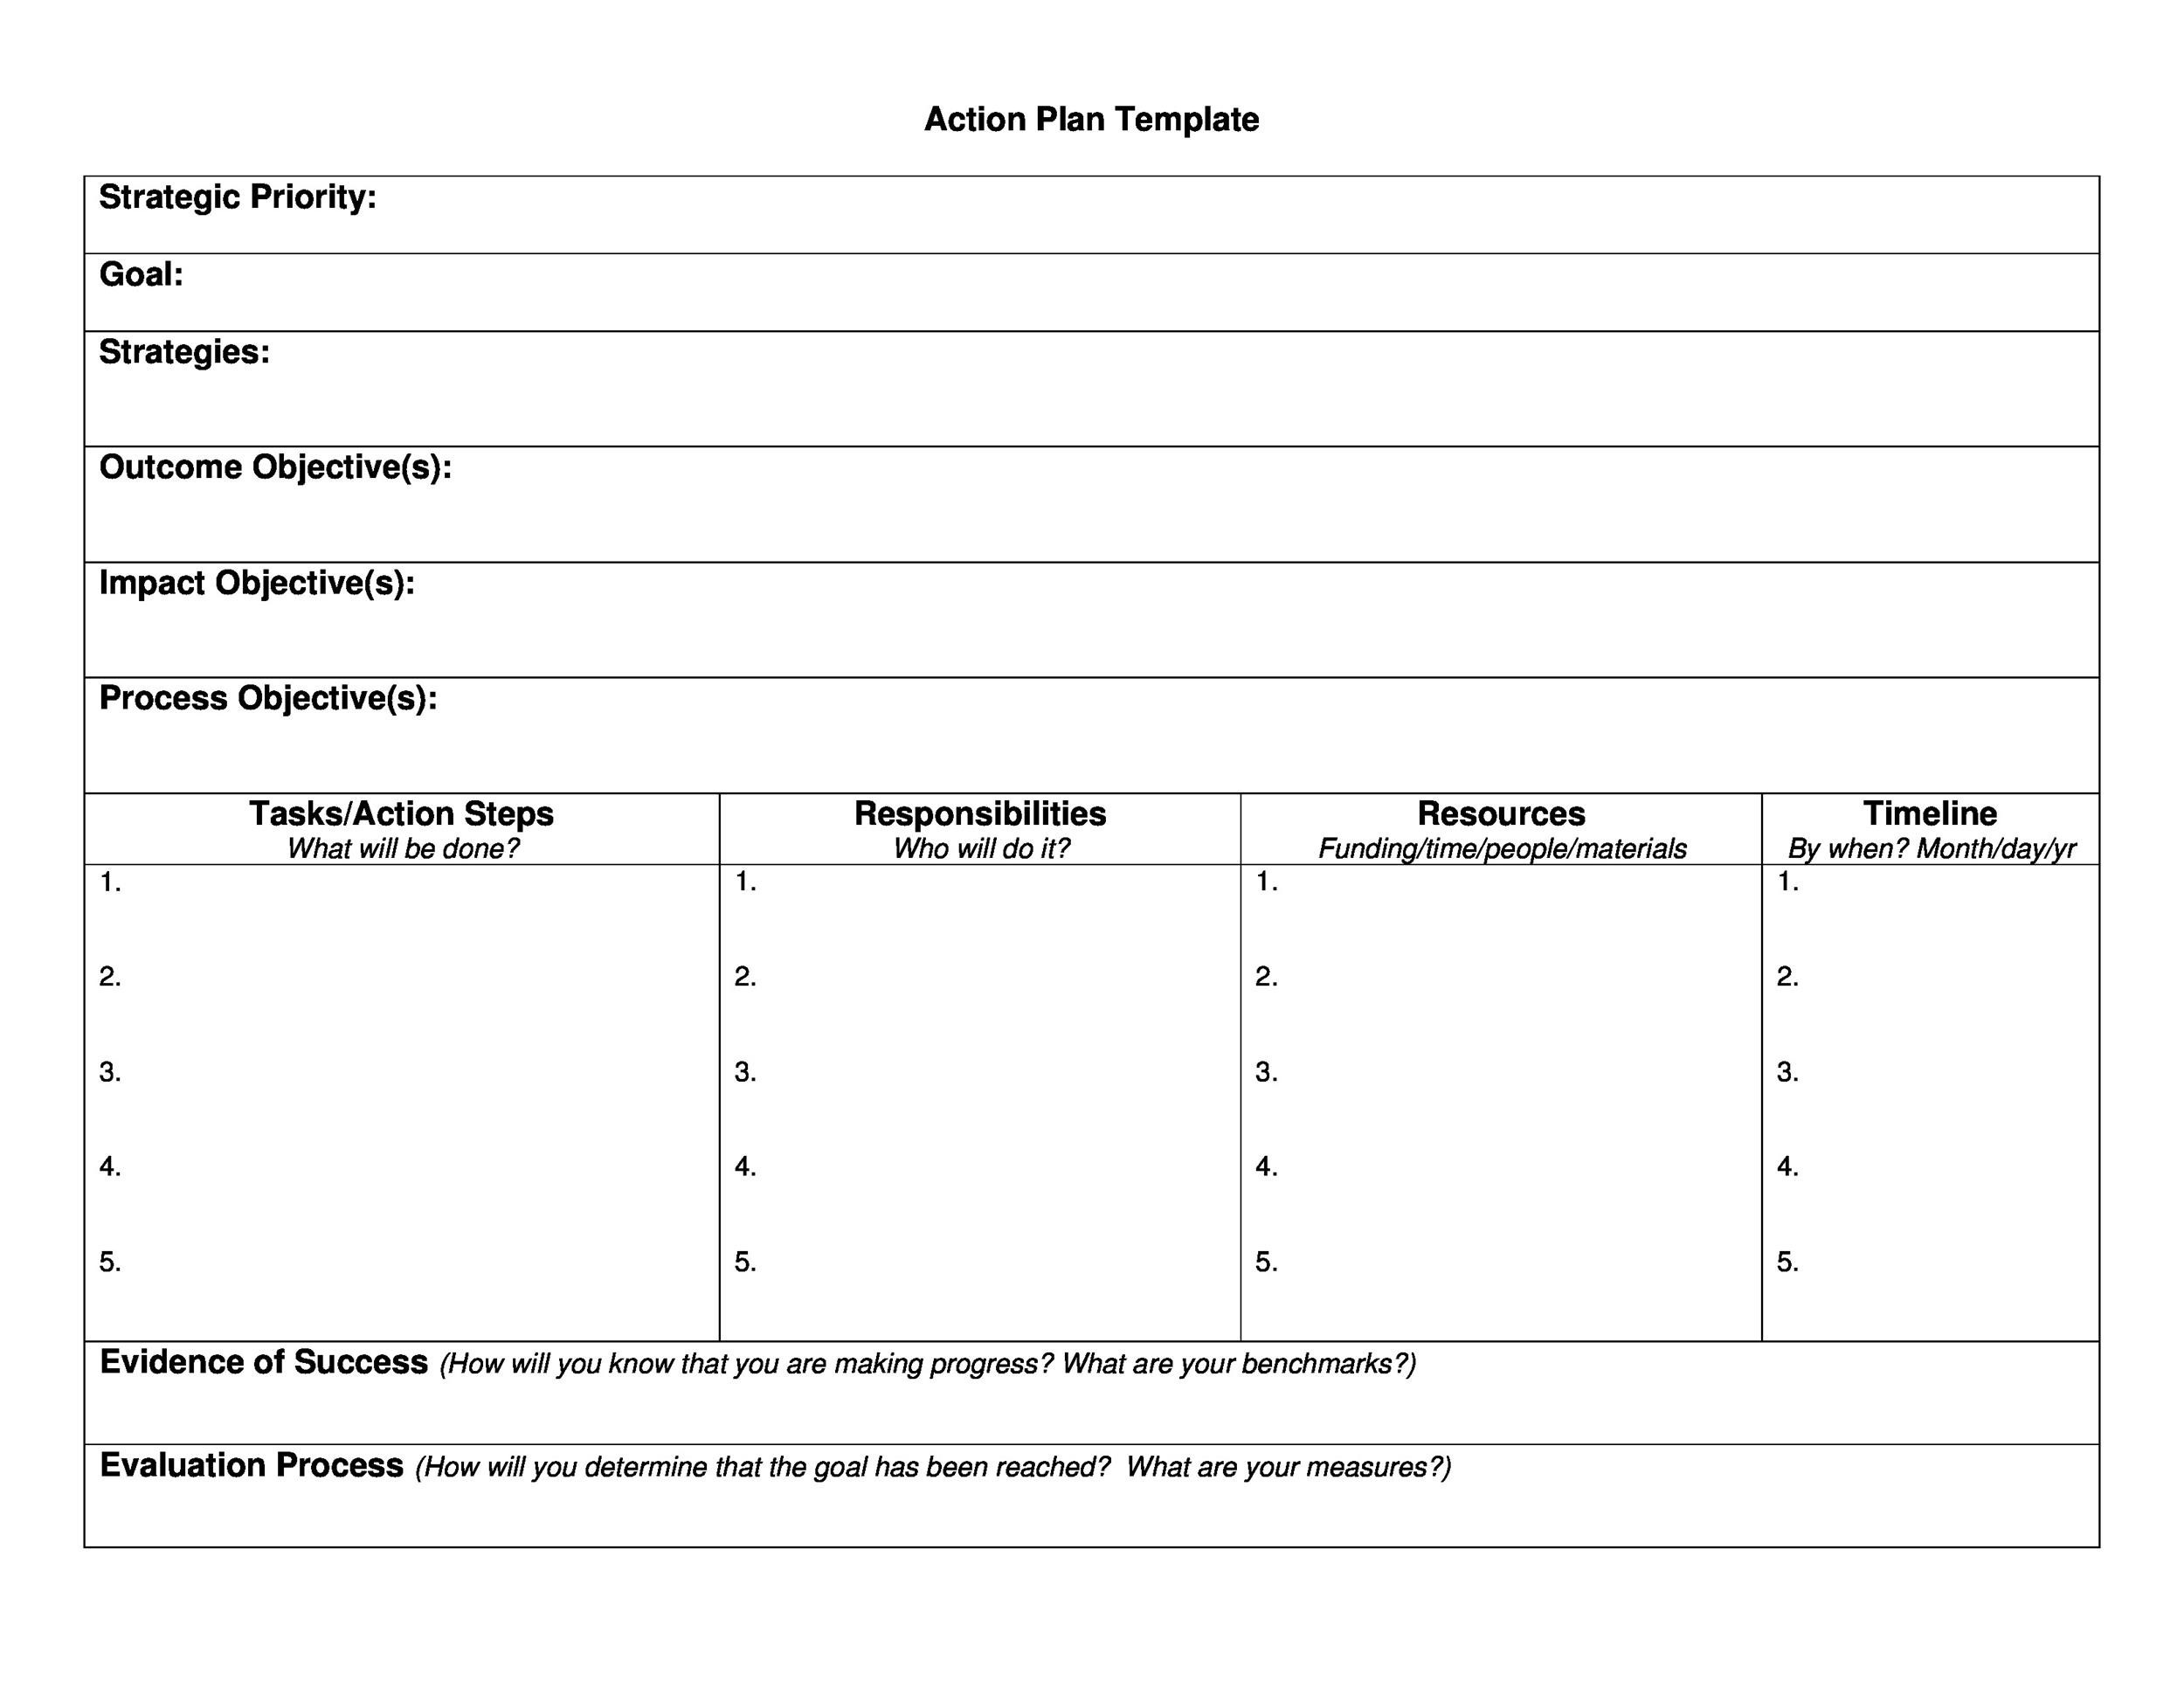 Action Plan Template Example